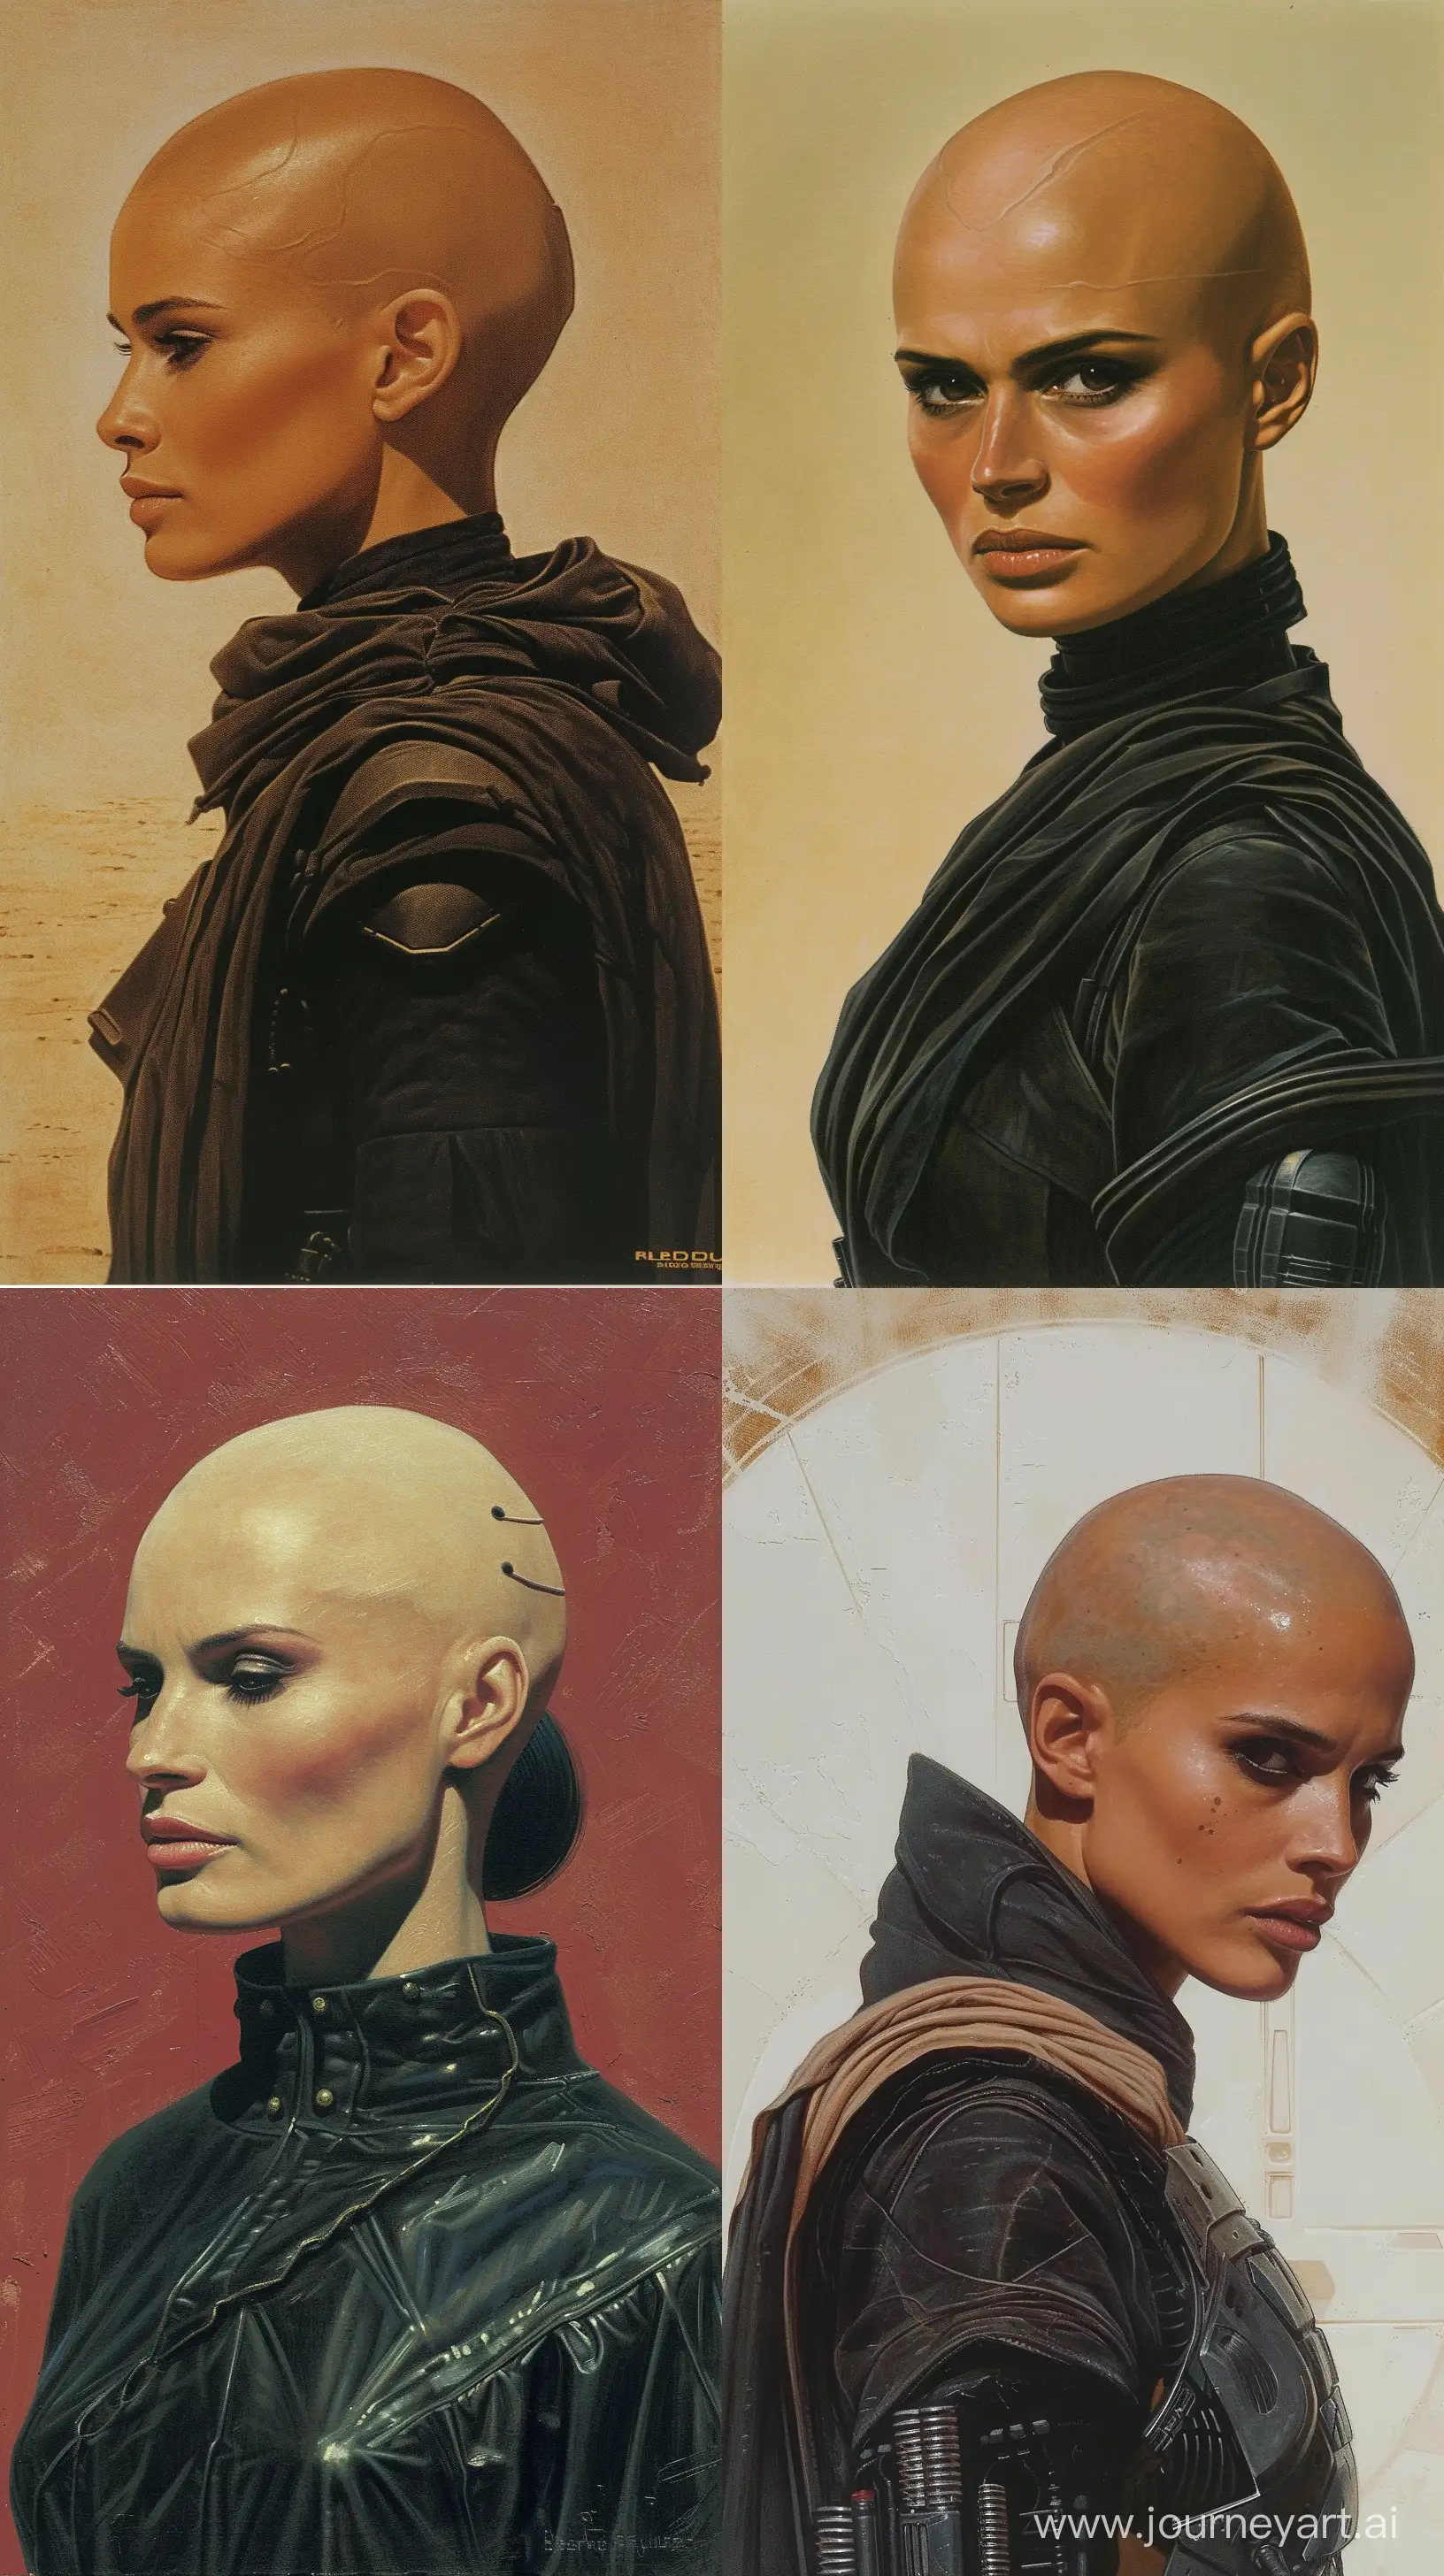 Concept art of a bald Bene Gesserit woman from Jodorowsky's Dune painted by Ralph McQuarrie. Dune. Retro Science Fiction Art style. in color. --ar 9:16